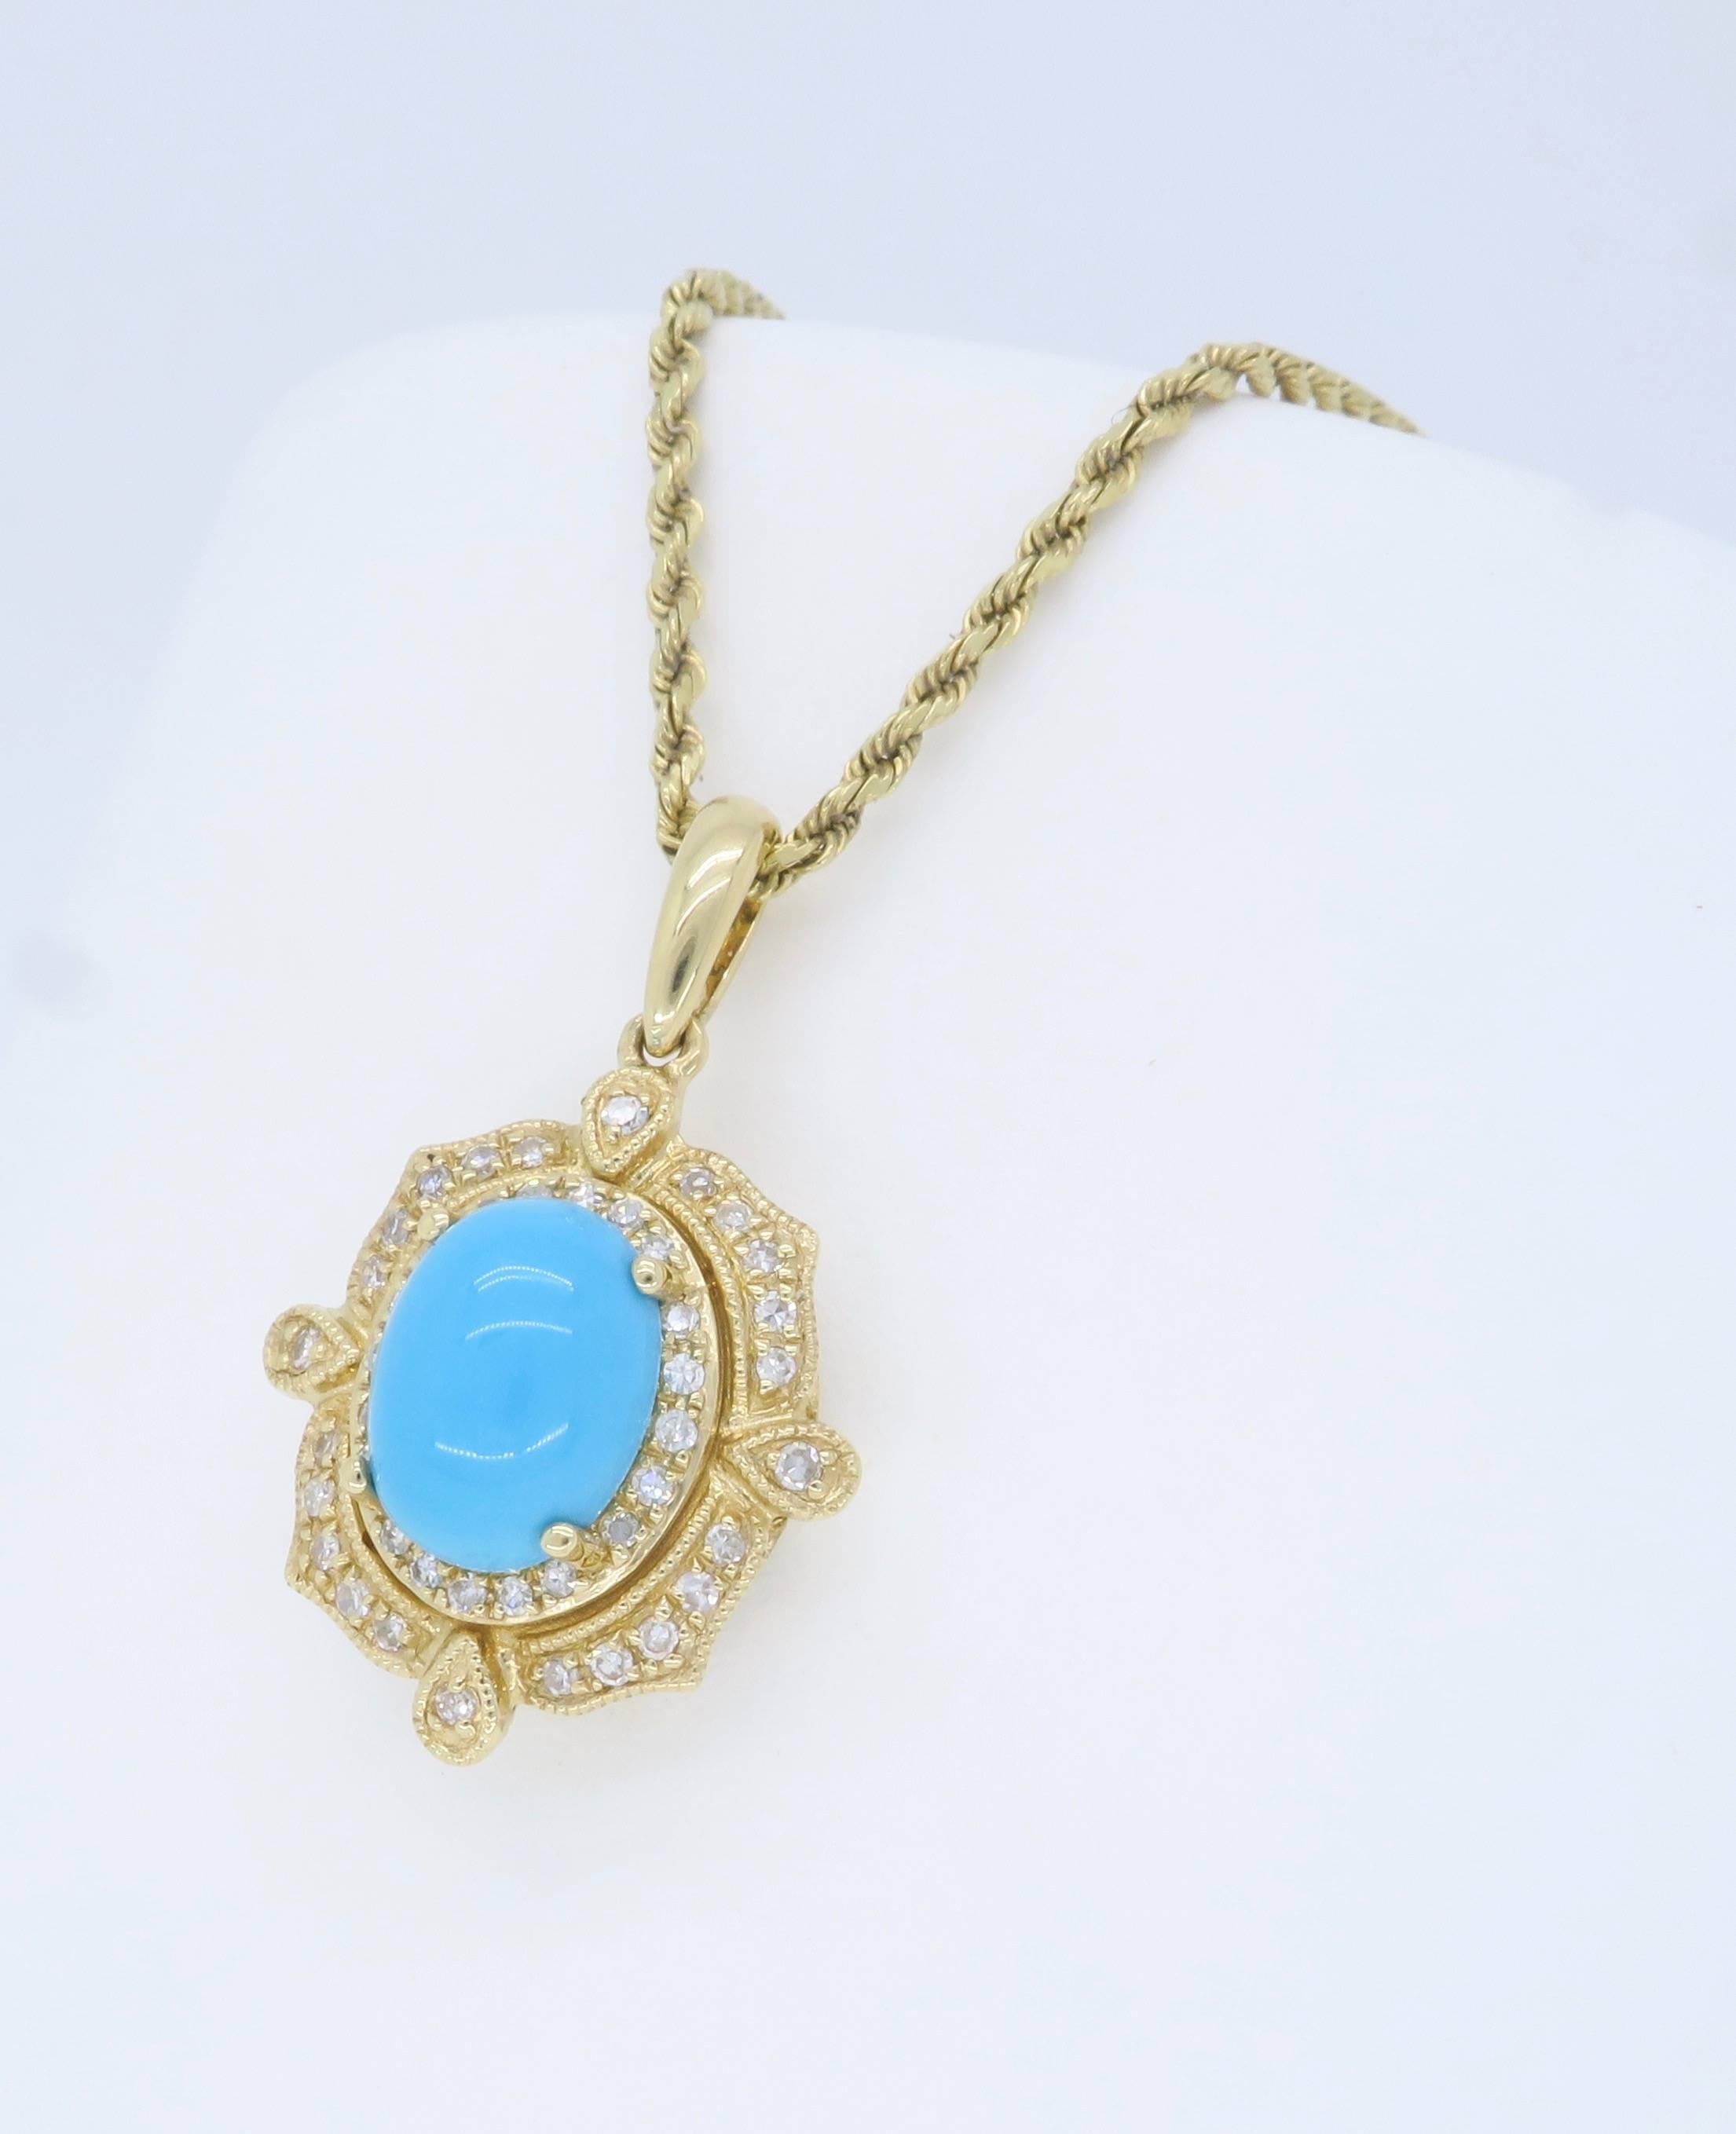 Designer necklace features an approximate 6x8mm Turquoise surrounded by a elegant display of approximately .15CTW of Single Cut Diamonds. The 14K yellow gold necklace is 18.5” long and weighs 5.8 grams. The necklace is stamped with the makers mark